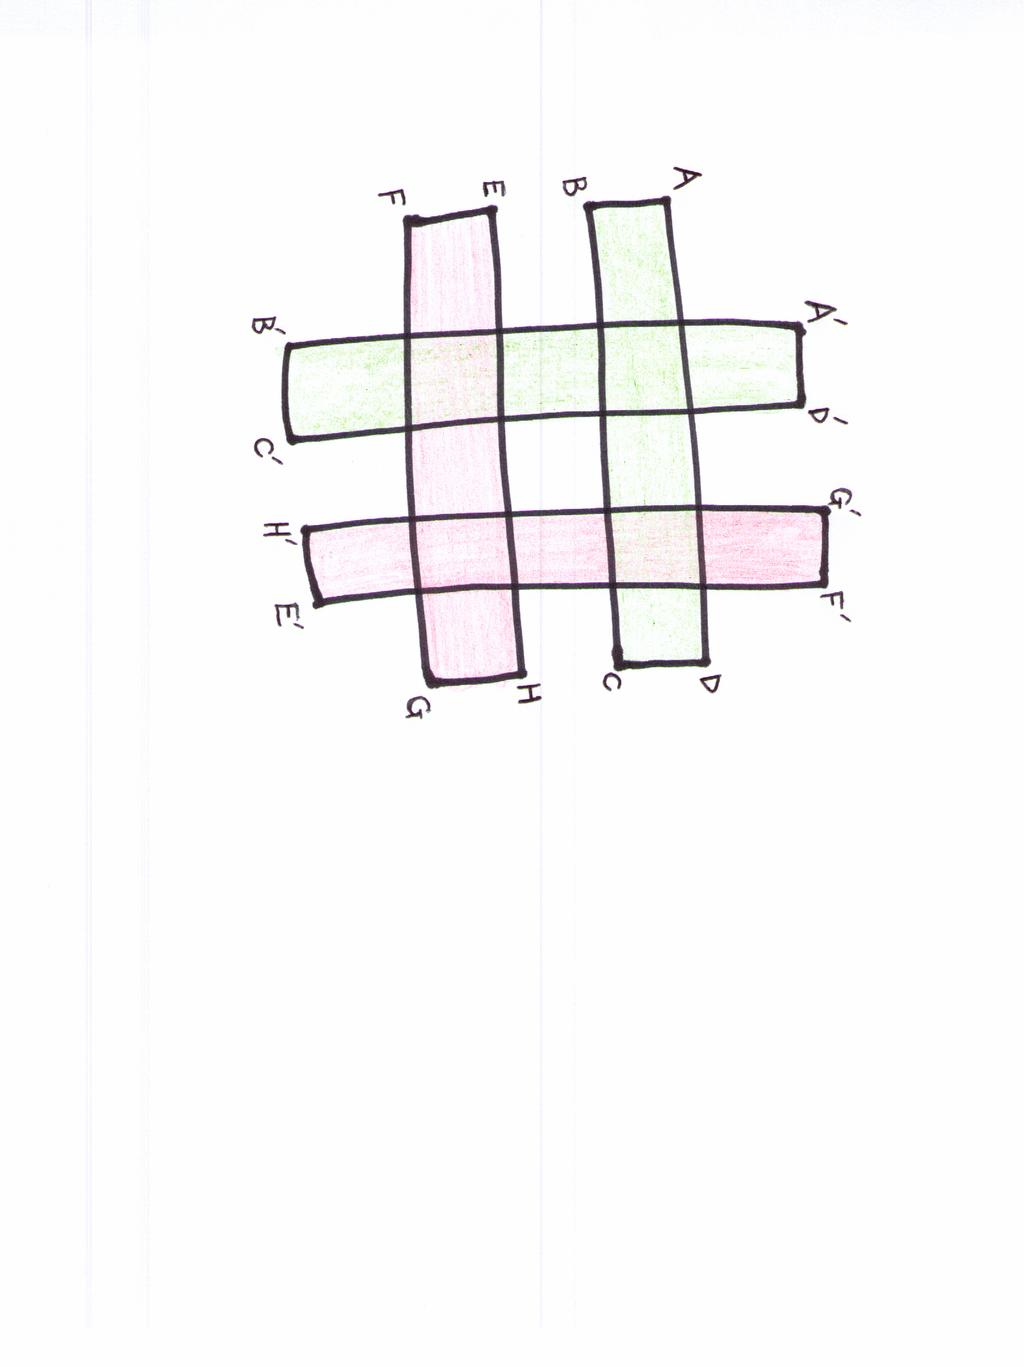 19 (a) (b) (c) Figure 2.2: The action of the homoclinic tangle on a rectangular patch is illustrated here. The patch consists of three stripes colored red, blue, and green.